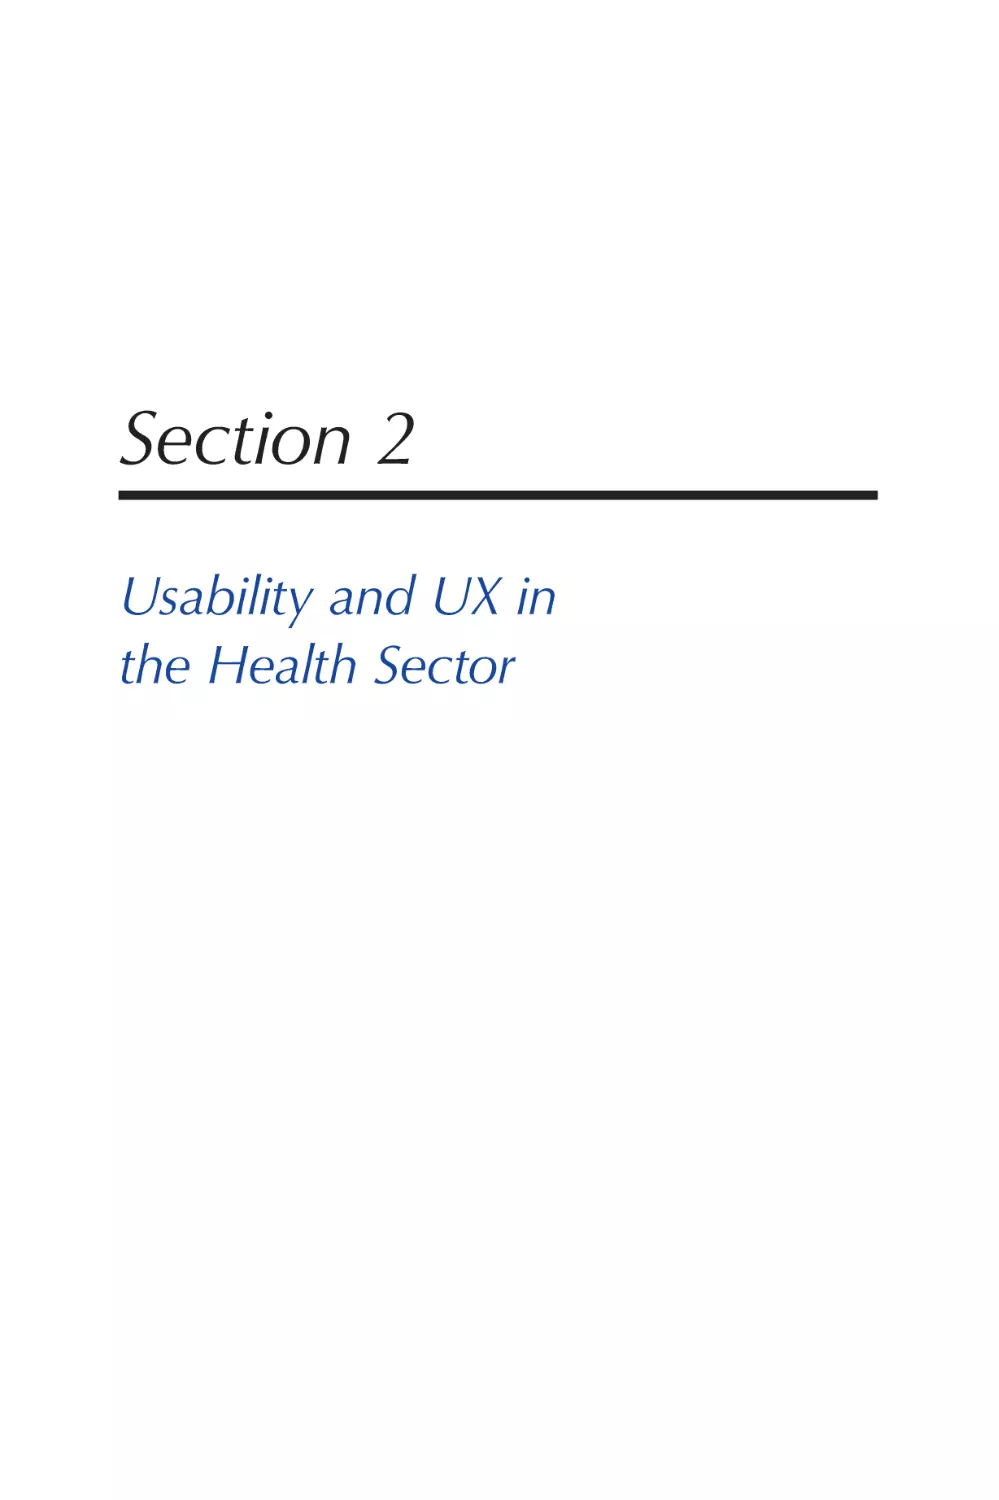 Section 2 Usability and UX in the Health Sector